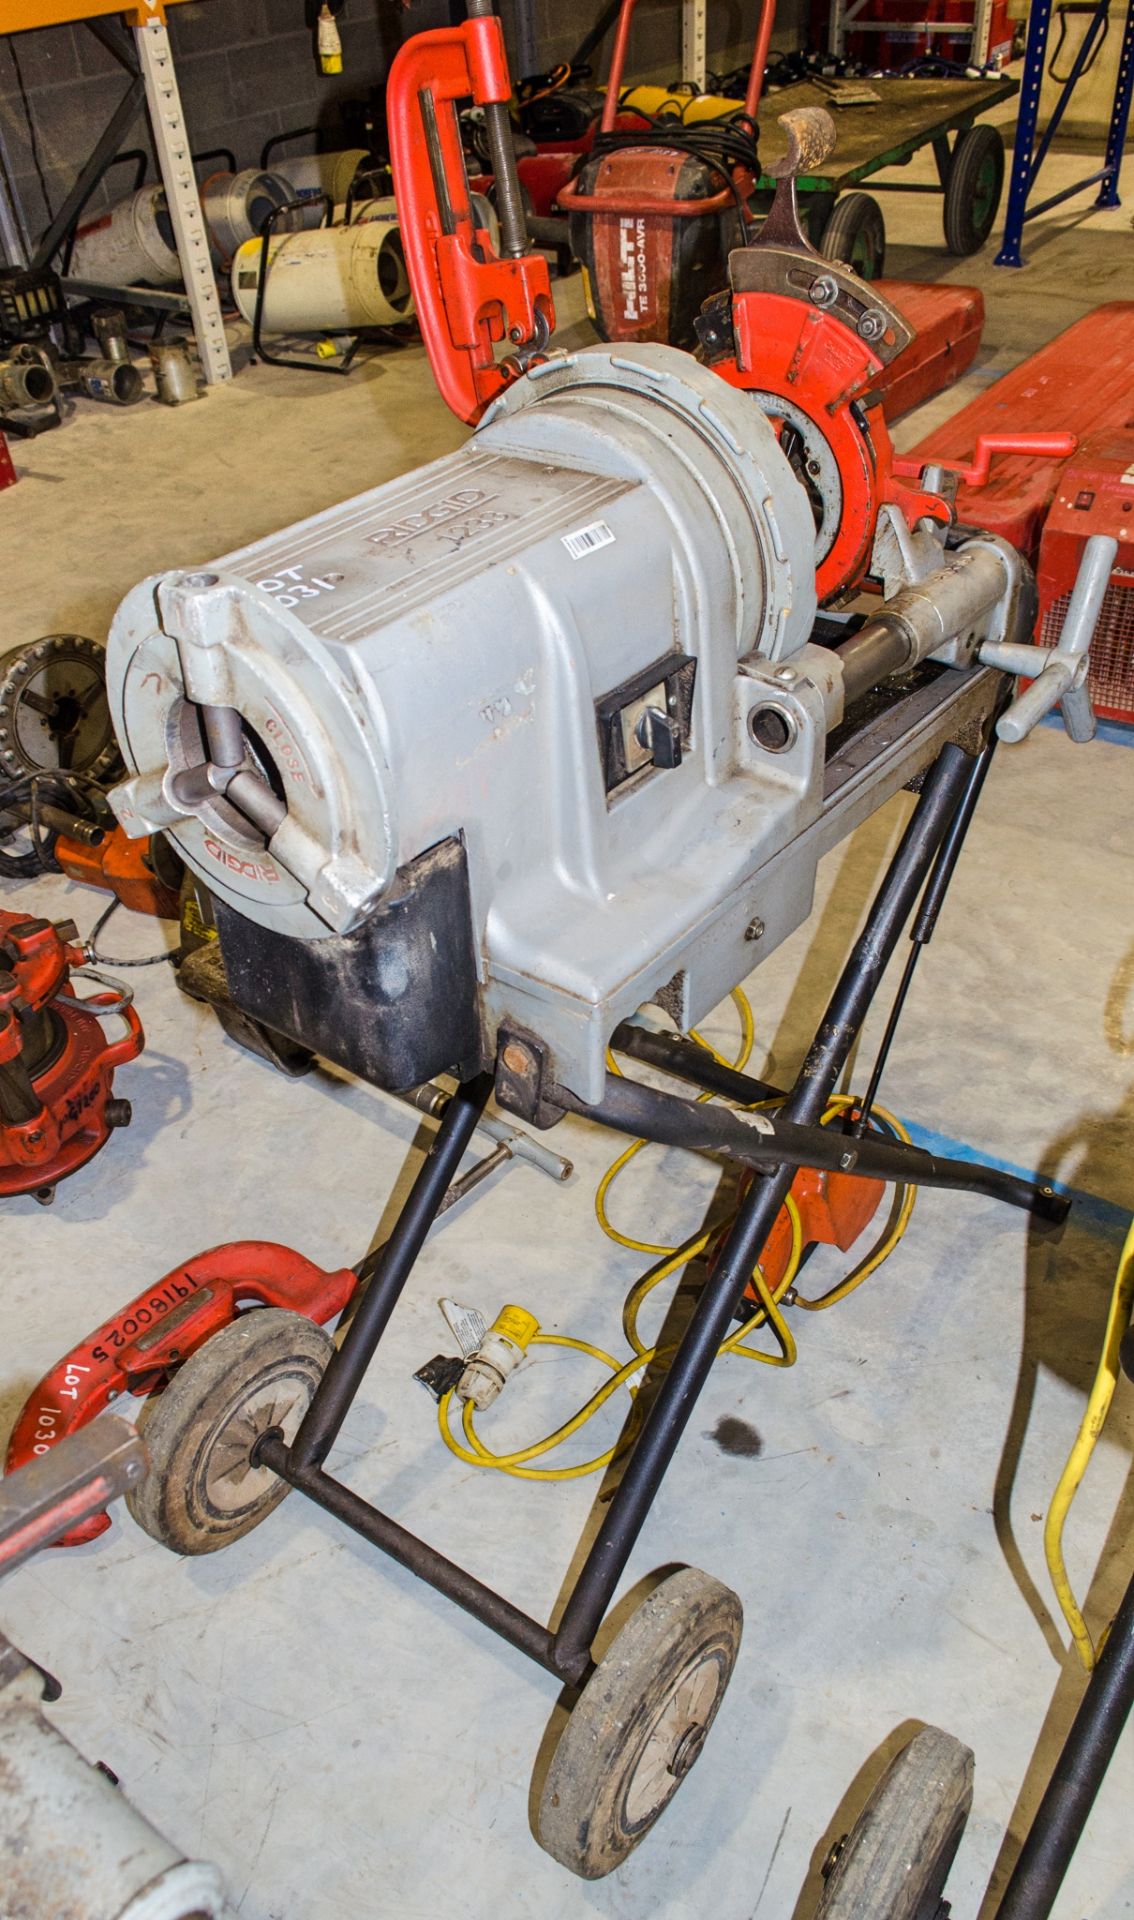 Ridgid 1233 110v pipe threading machine c/w foot pedal and wheeled stand 19420125 - Image 2 of 2